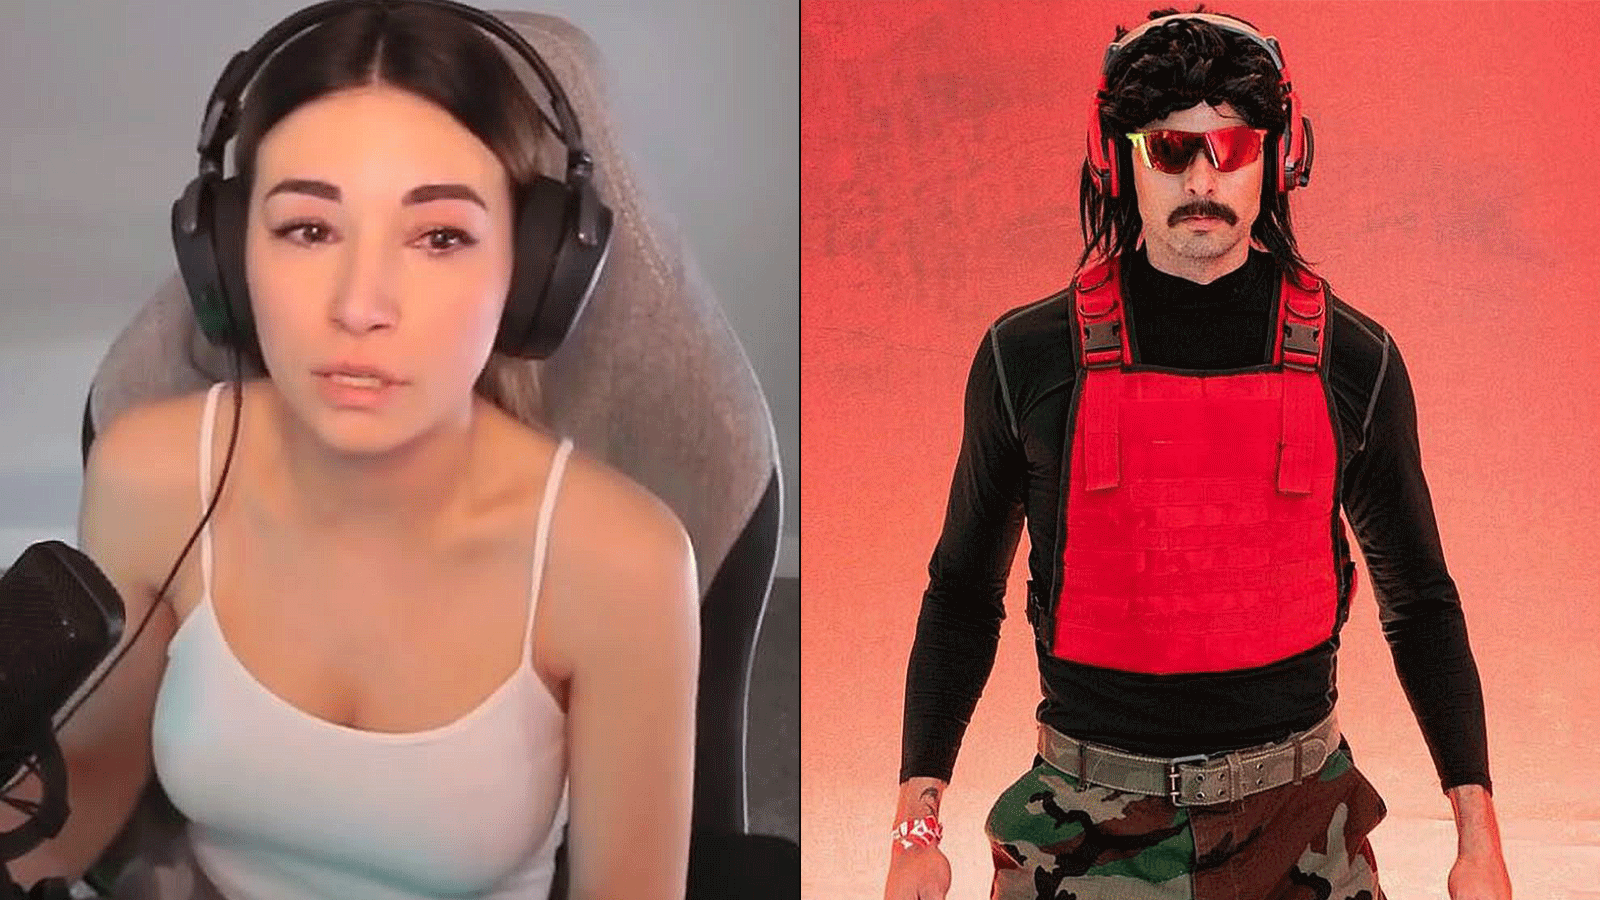 amy peck add dr disrespect girl he cheated with photo